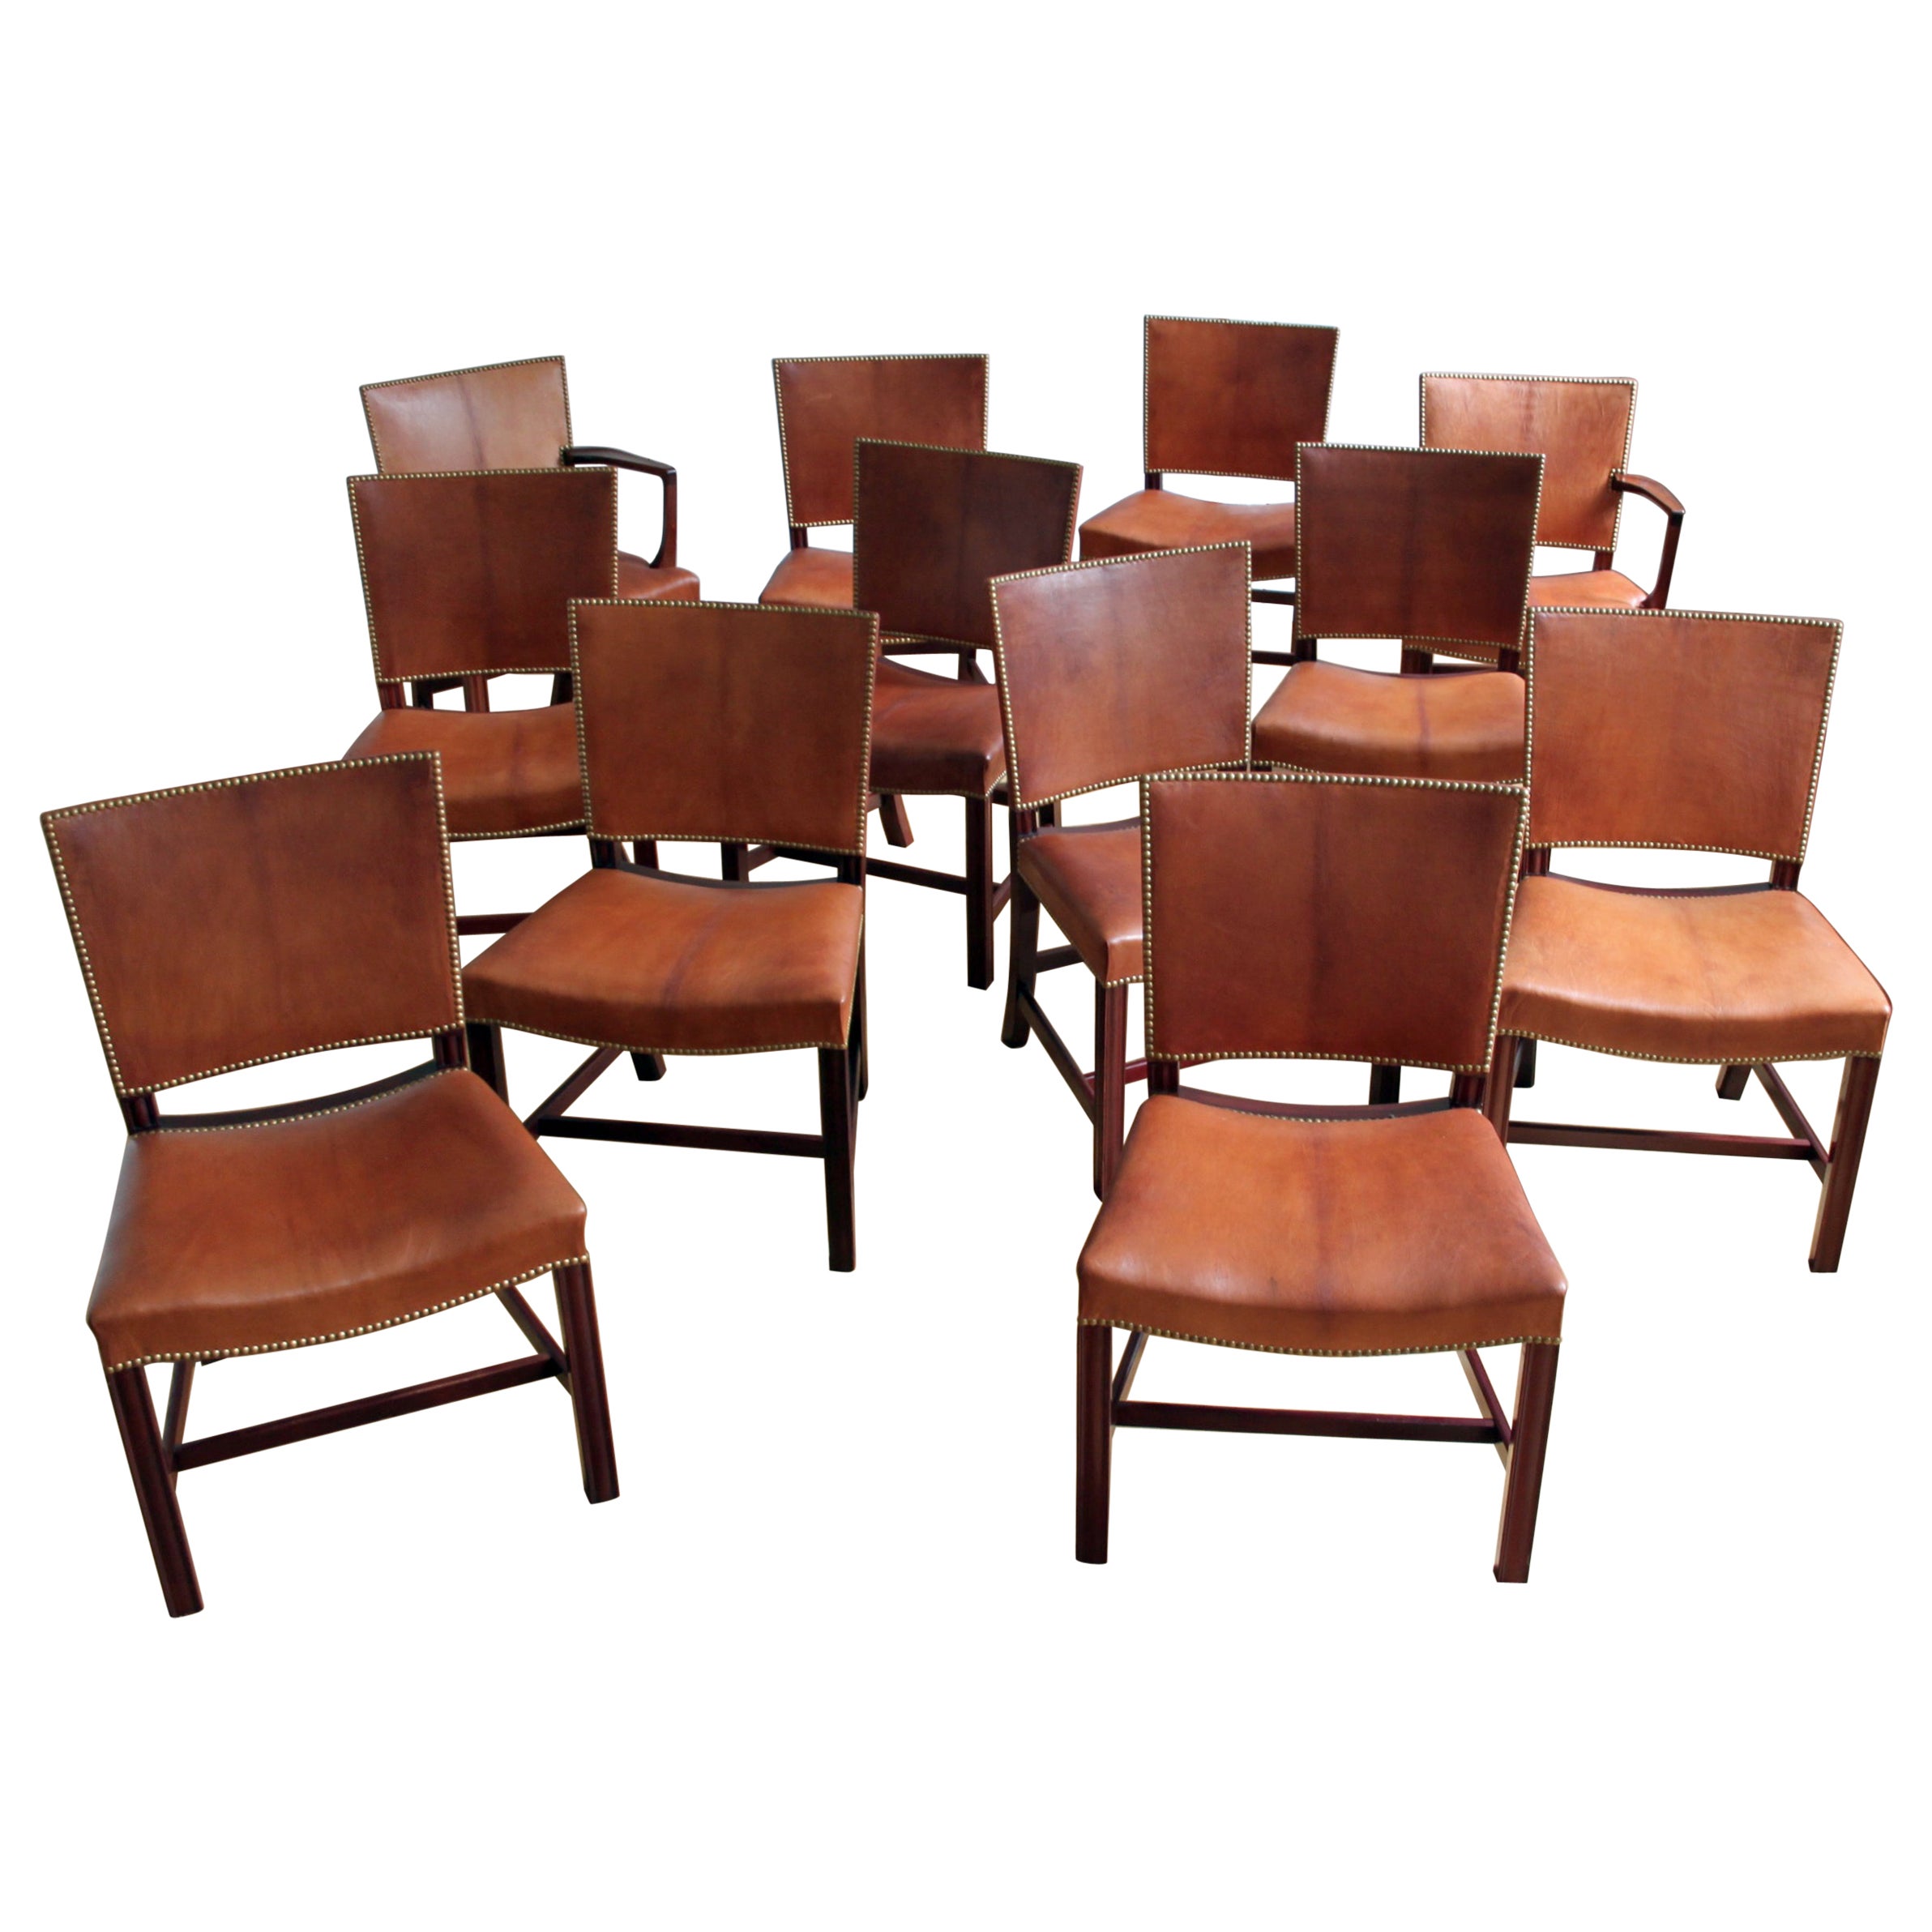 Set of 12 Kaare Klint Red Chairs, Niger Leather, Mahogany